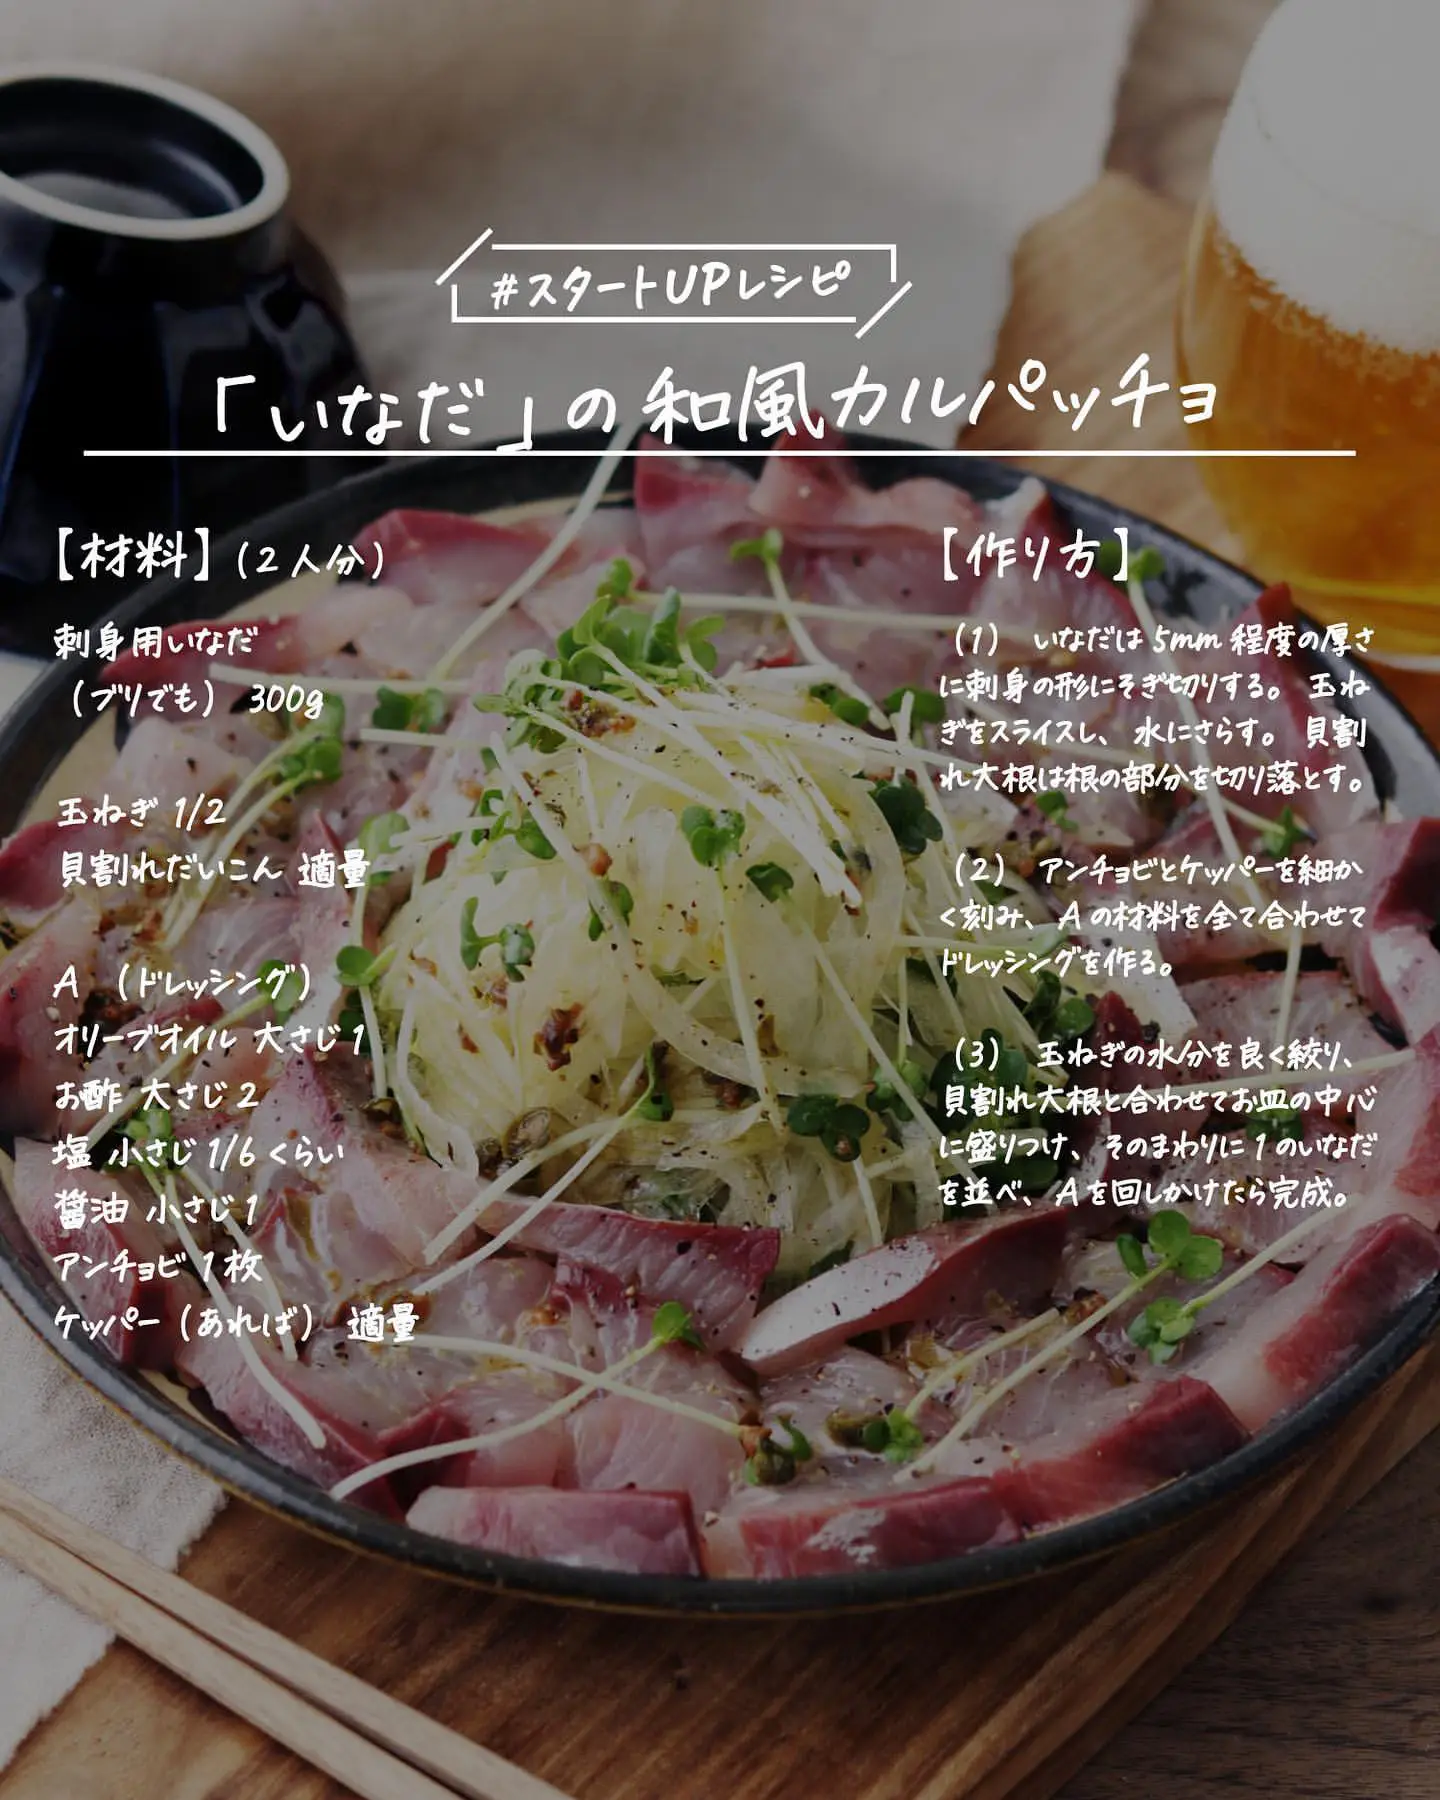 Japanese style carpaccio of small yellowtail | Gallery posted by